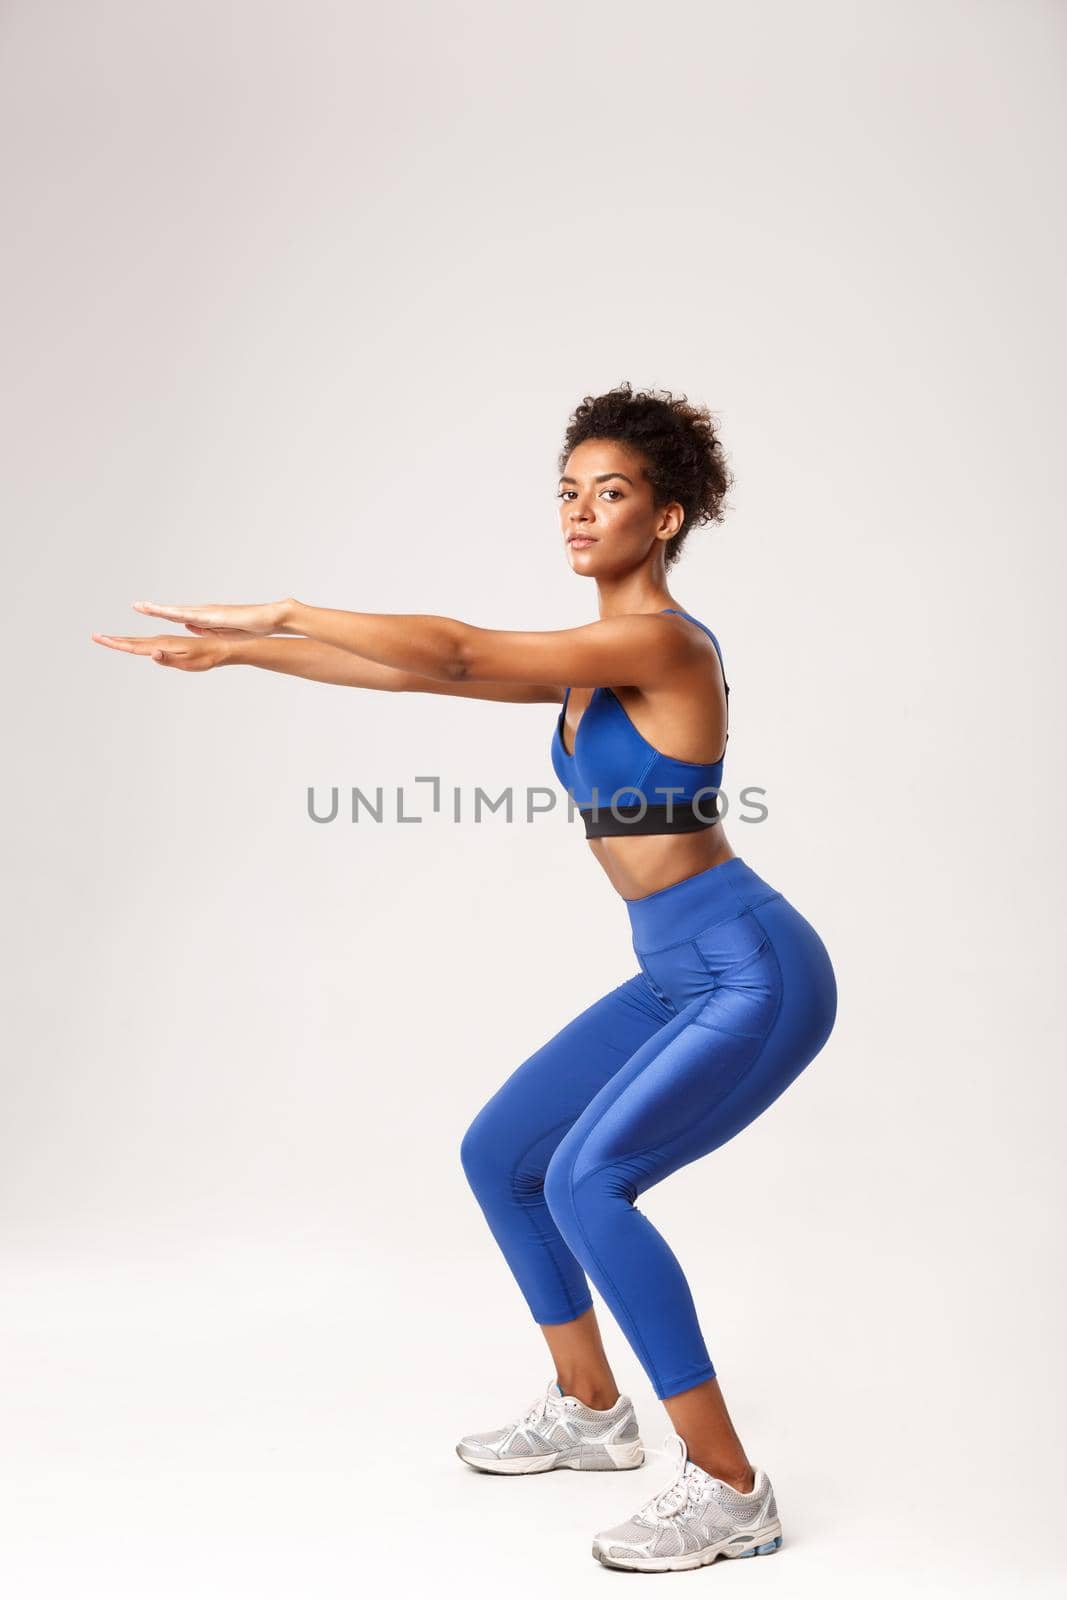 Full length of beautiful and healthy african-american woman in blue sport costume, stretching hands for squats exercises, looking at camera, worout over white background.